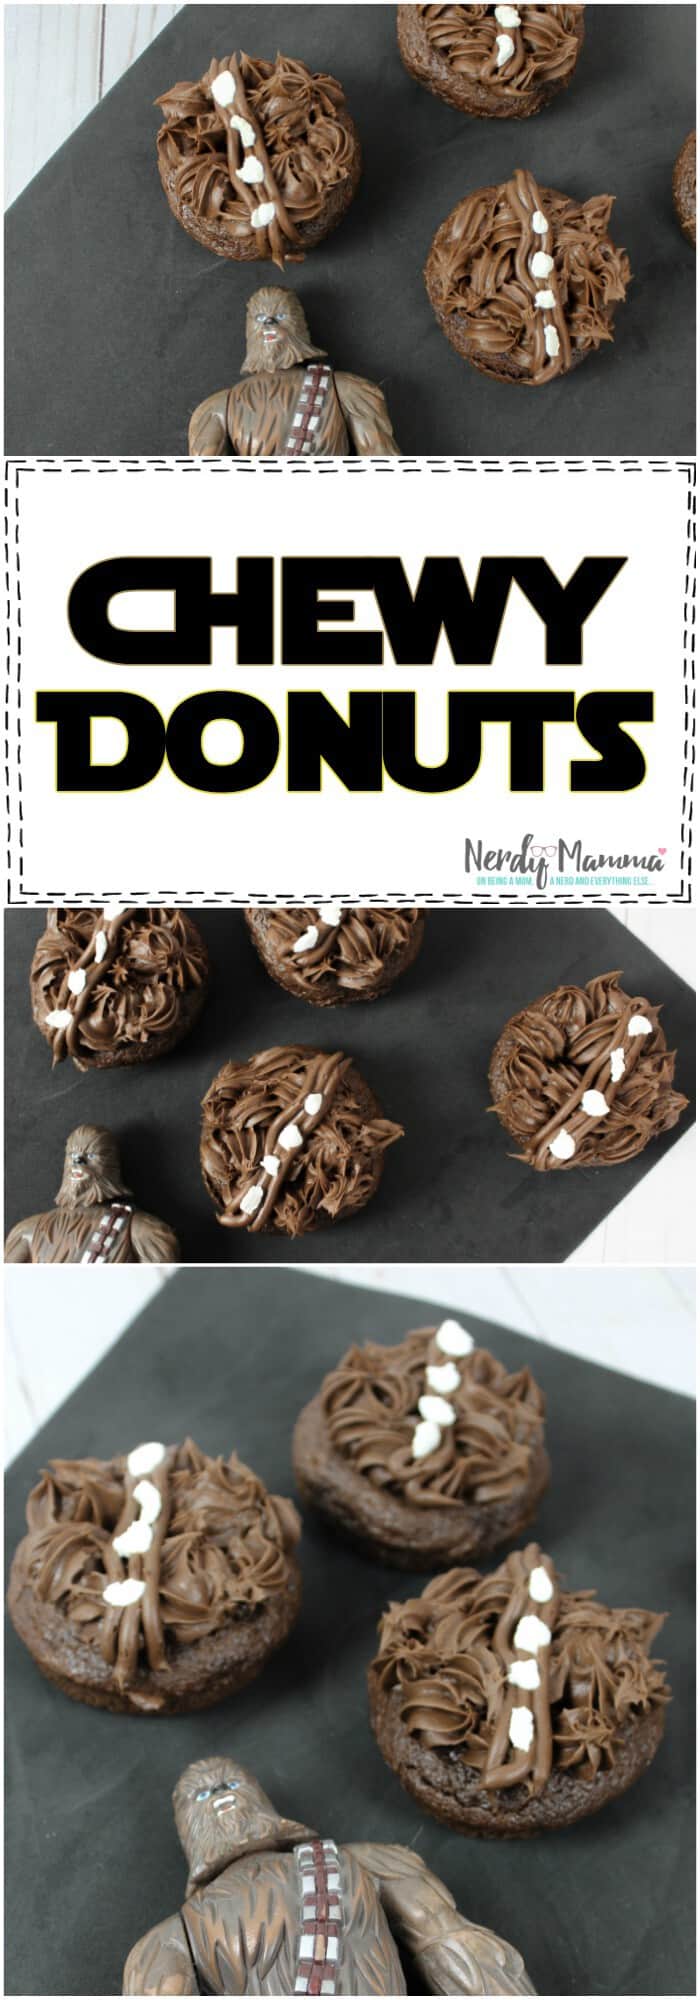 In a galaxy far, far away, is a hairy beast everyone on our planet loves. Homage to this noble fur-covered brute is necessary in the form of these amazing Chewbacca Donuts - The Chocolatiest Donuts in the Universe. Chewie would be proud. #nerdymammablog #donut #chocolatedonut #starwars #starwarsfood #chewbaccadonuts #chewiedonuts #hansolomovie #hansolomoviefood #solomovie #solomoviefood #chocolatedonuts #devilsfooddonuts #doughnuts #homemadedonuts